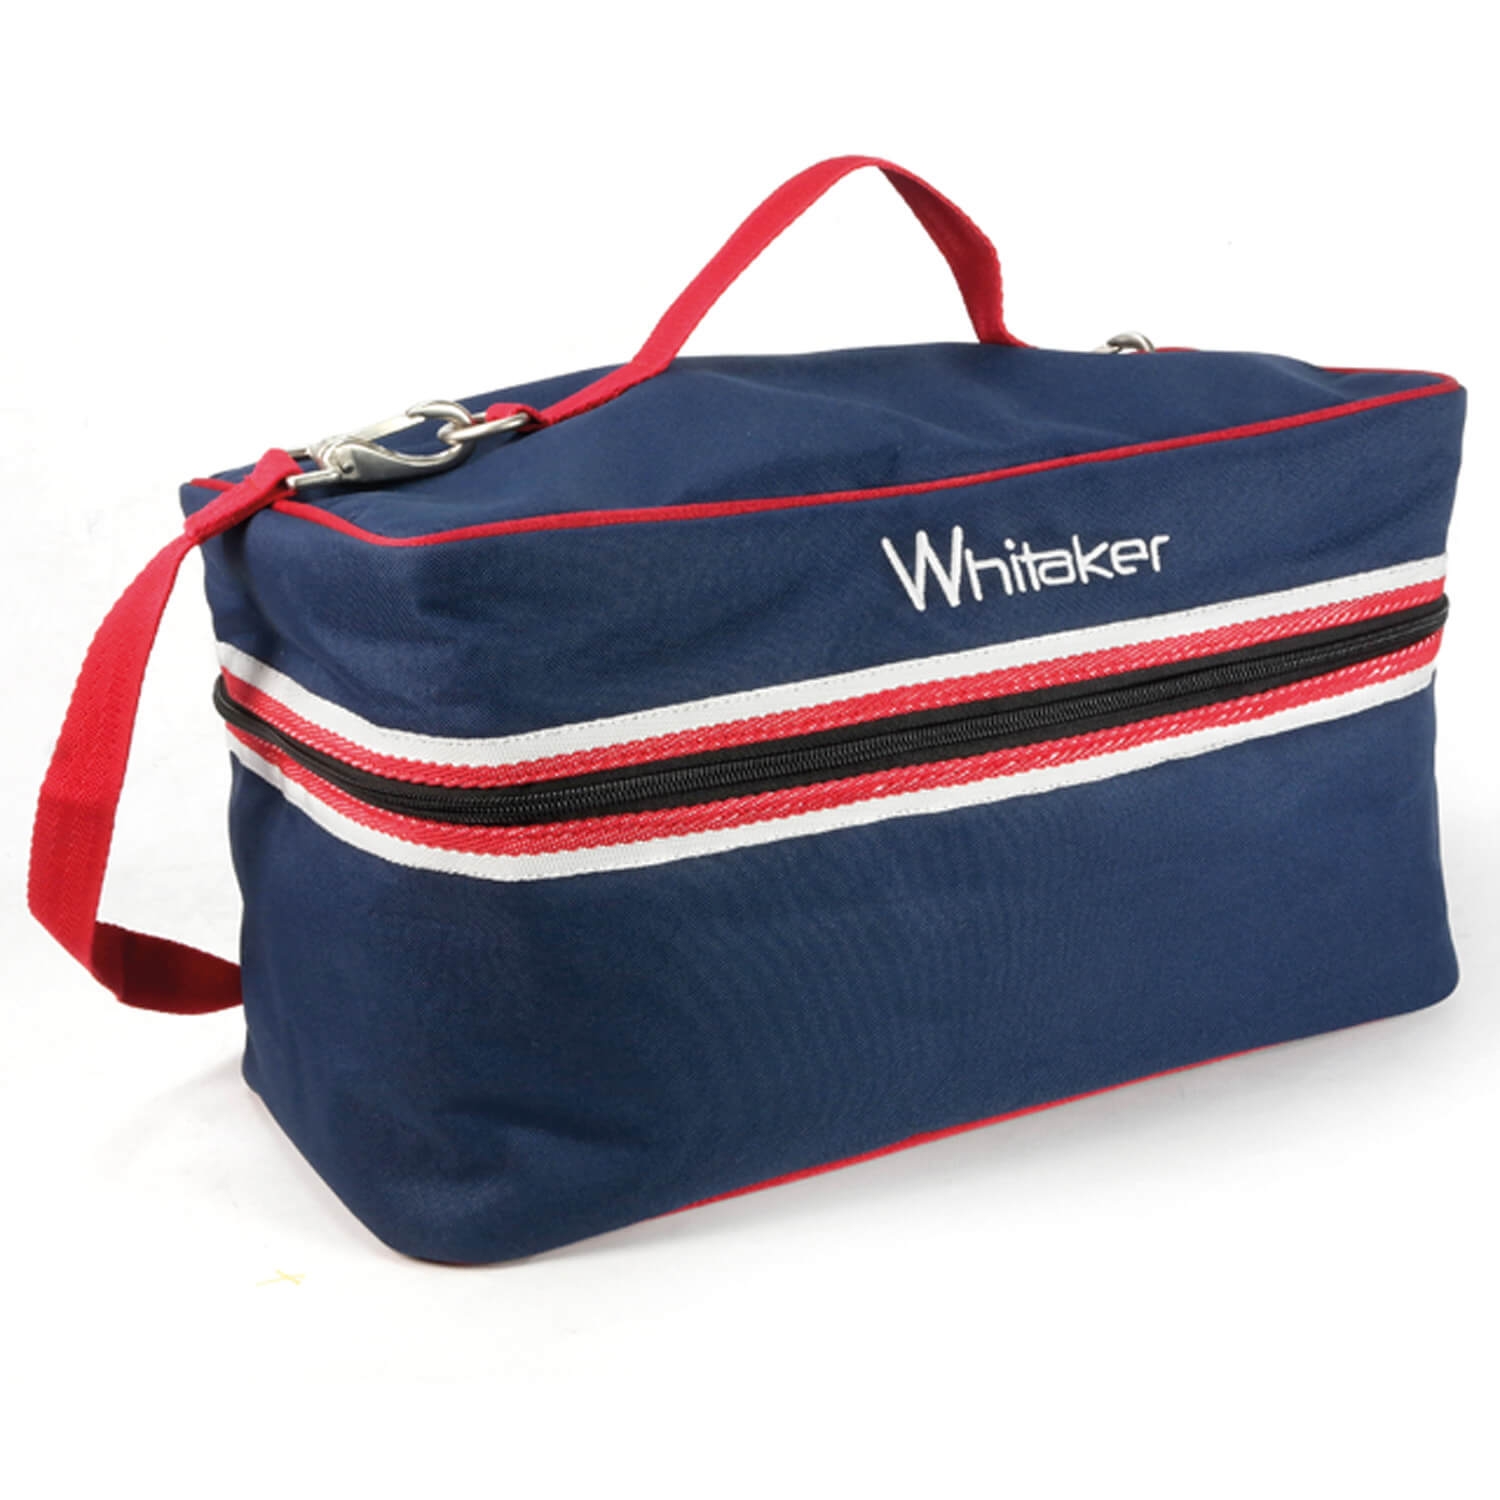 WHITAKER KETTLEWELL GROOMING BAG  One Size